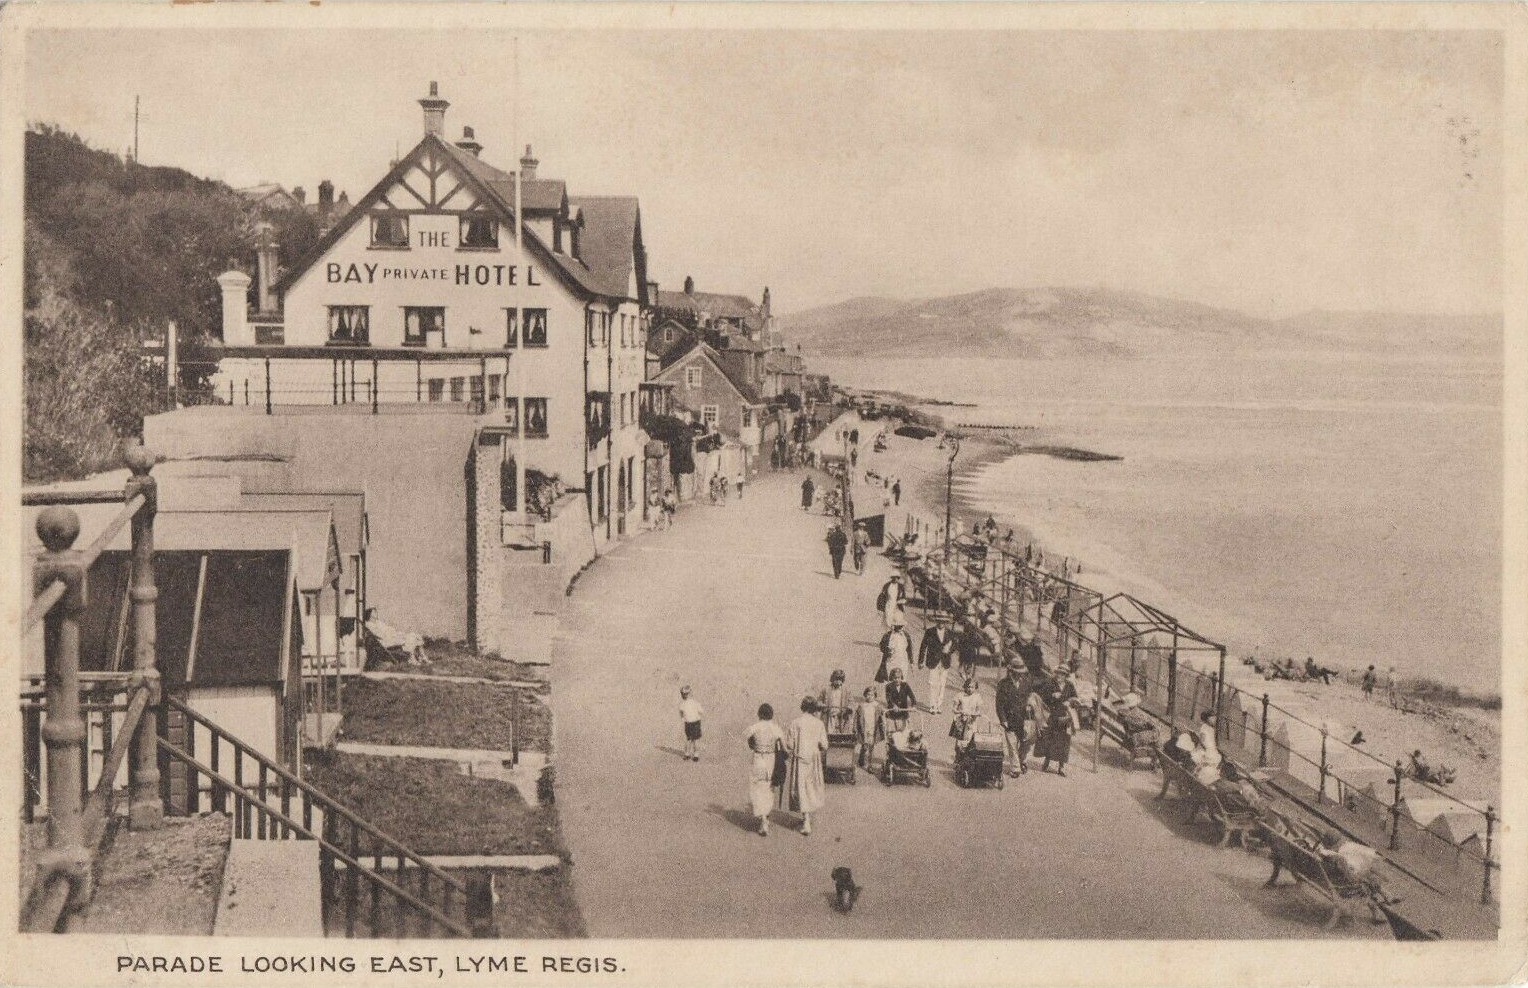 Vintage postcard of the Bay Hotel and the Parade looking east, Lyme Regis